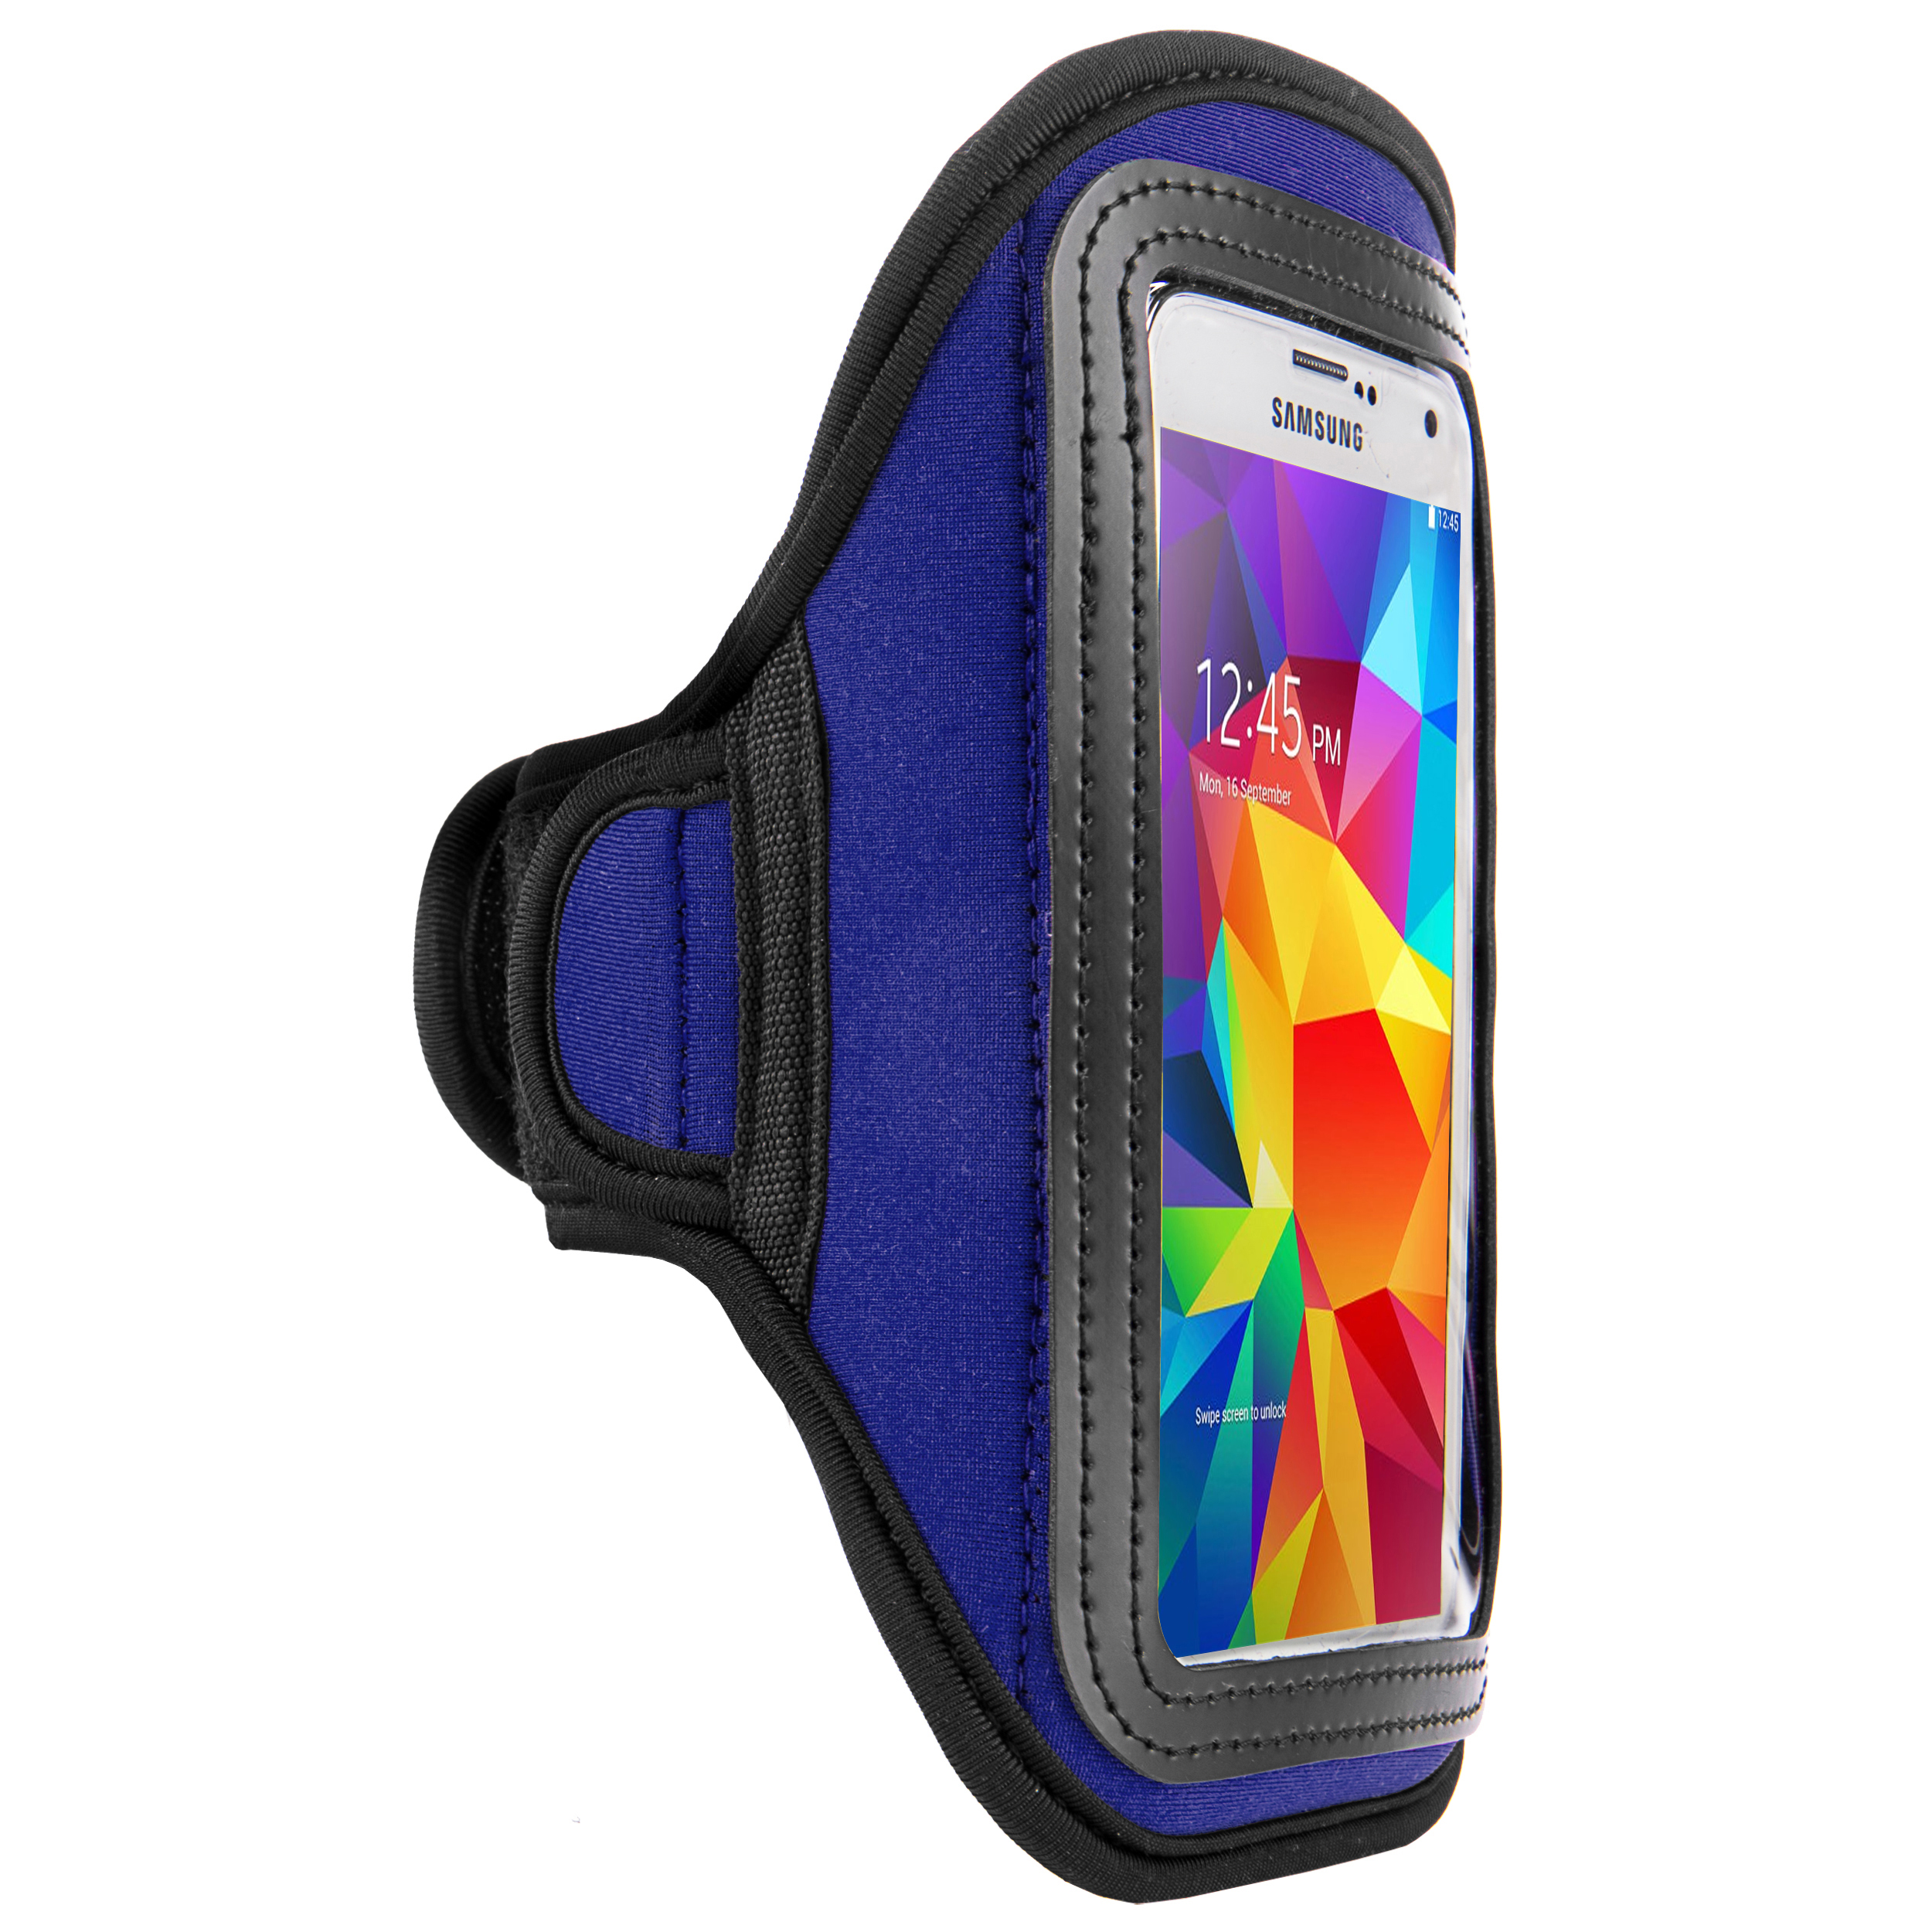 Running Gym Workouts Exercise Phone Armband for Apple iPhone 11/ Xs / 8 / 7 - image 5 of 8